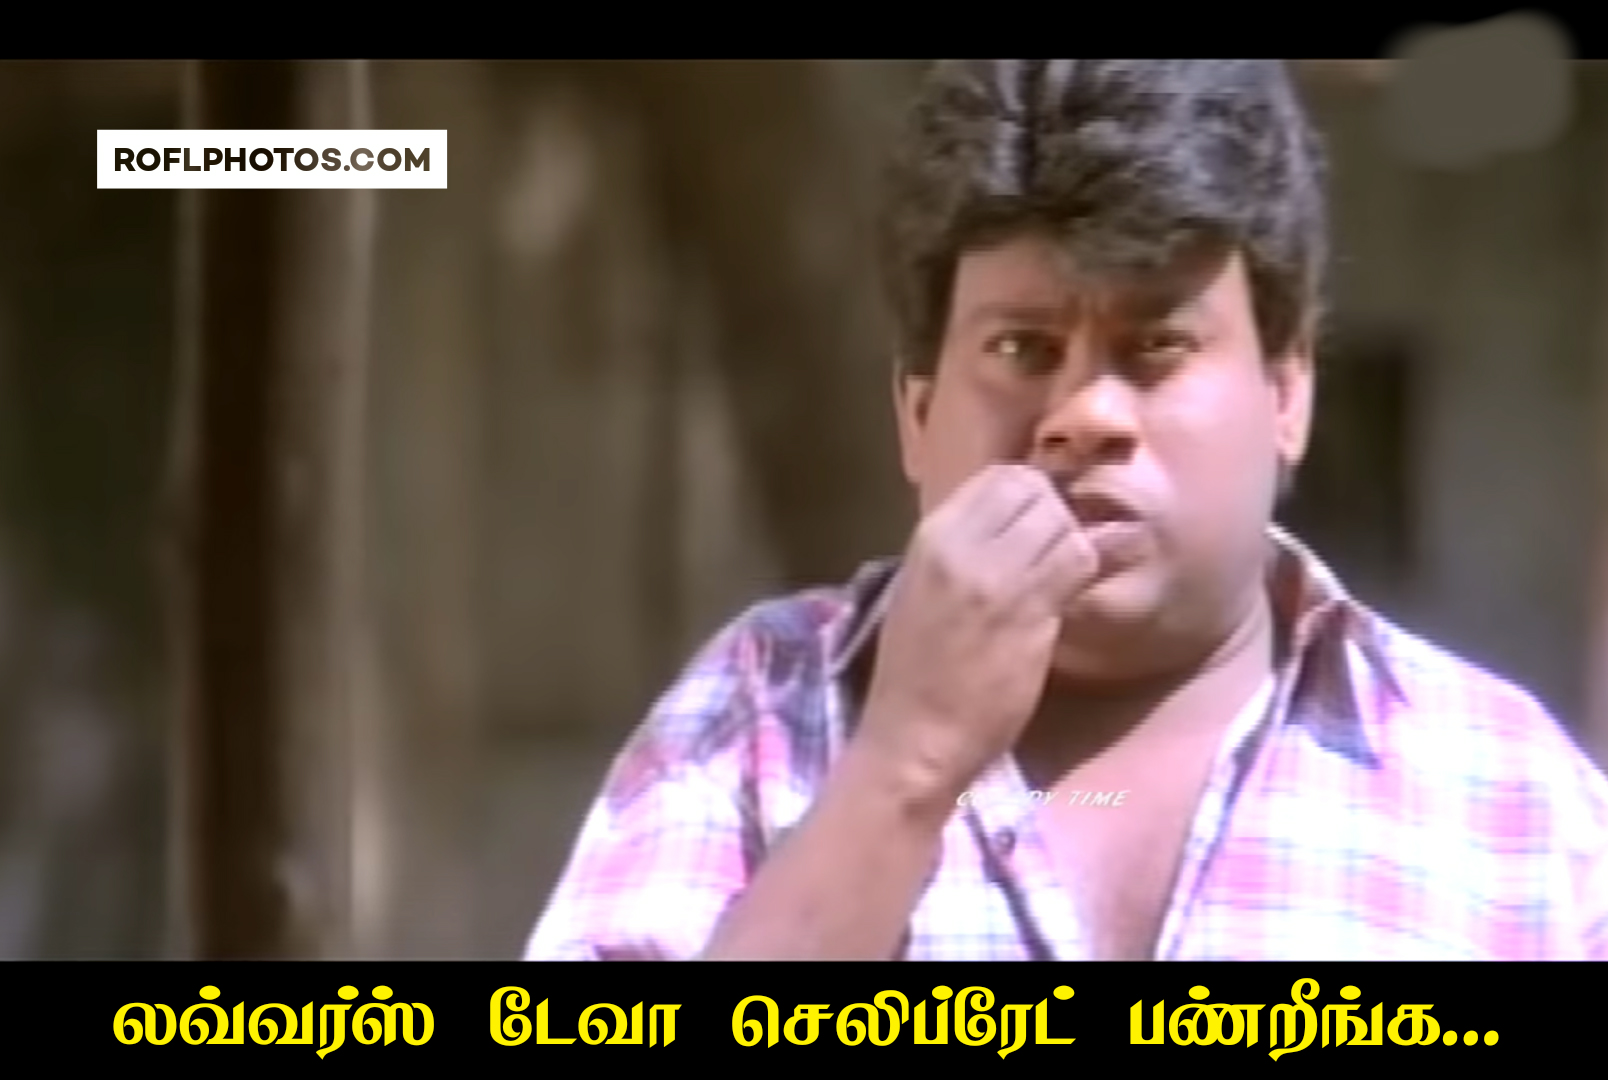 Tamil Comedy Memes Senthil Memes Images Senthil Comedy Memes Download Tamil Funny Images With Dialogues Tamil Photo Comments Download Tamil Comedy Images With Commants Tamil Dialogues With Its a bit different from his usual comedy tracks and makes us laugh without getting beaten by a crowd. tamil comedy memes senthil memes